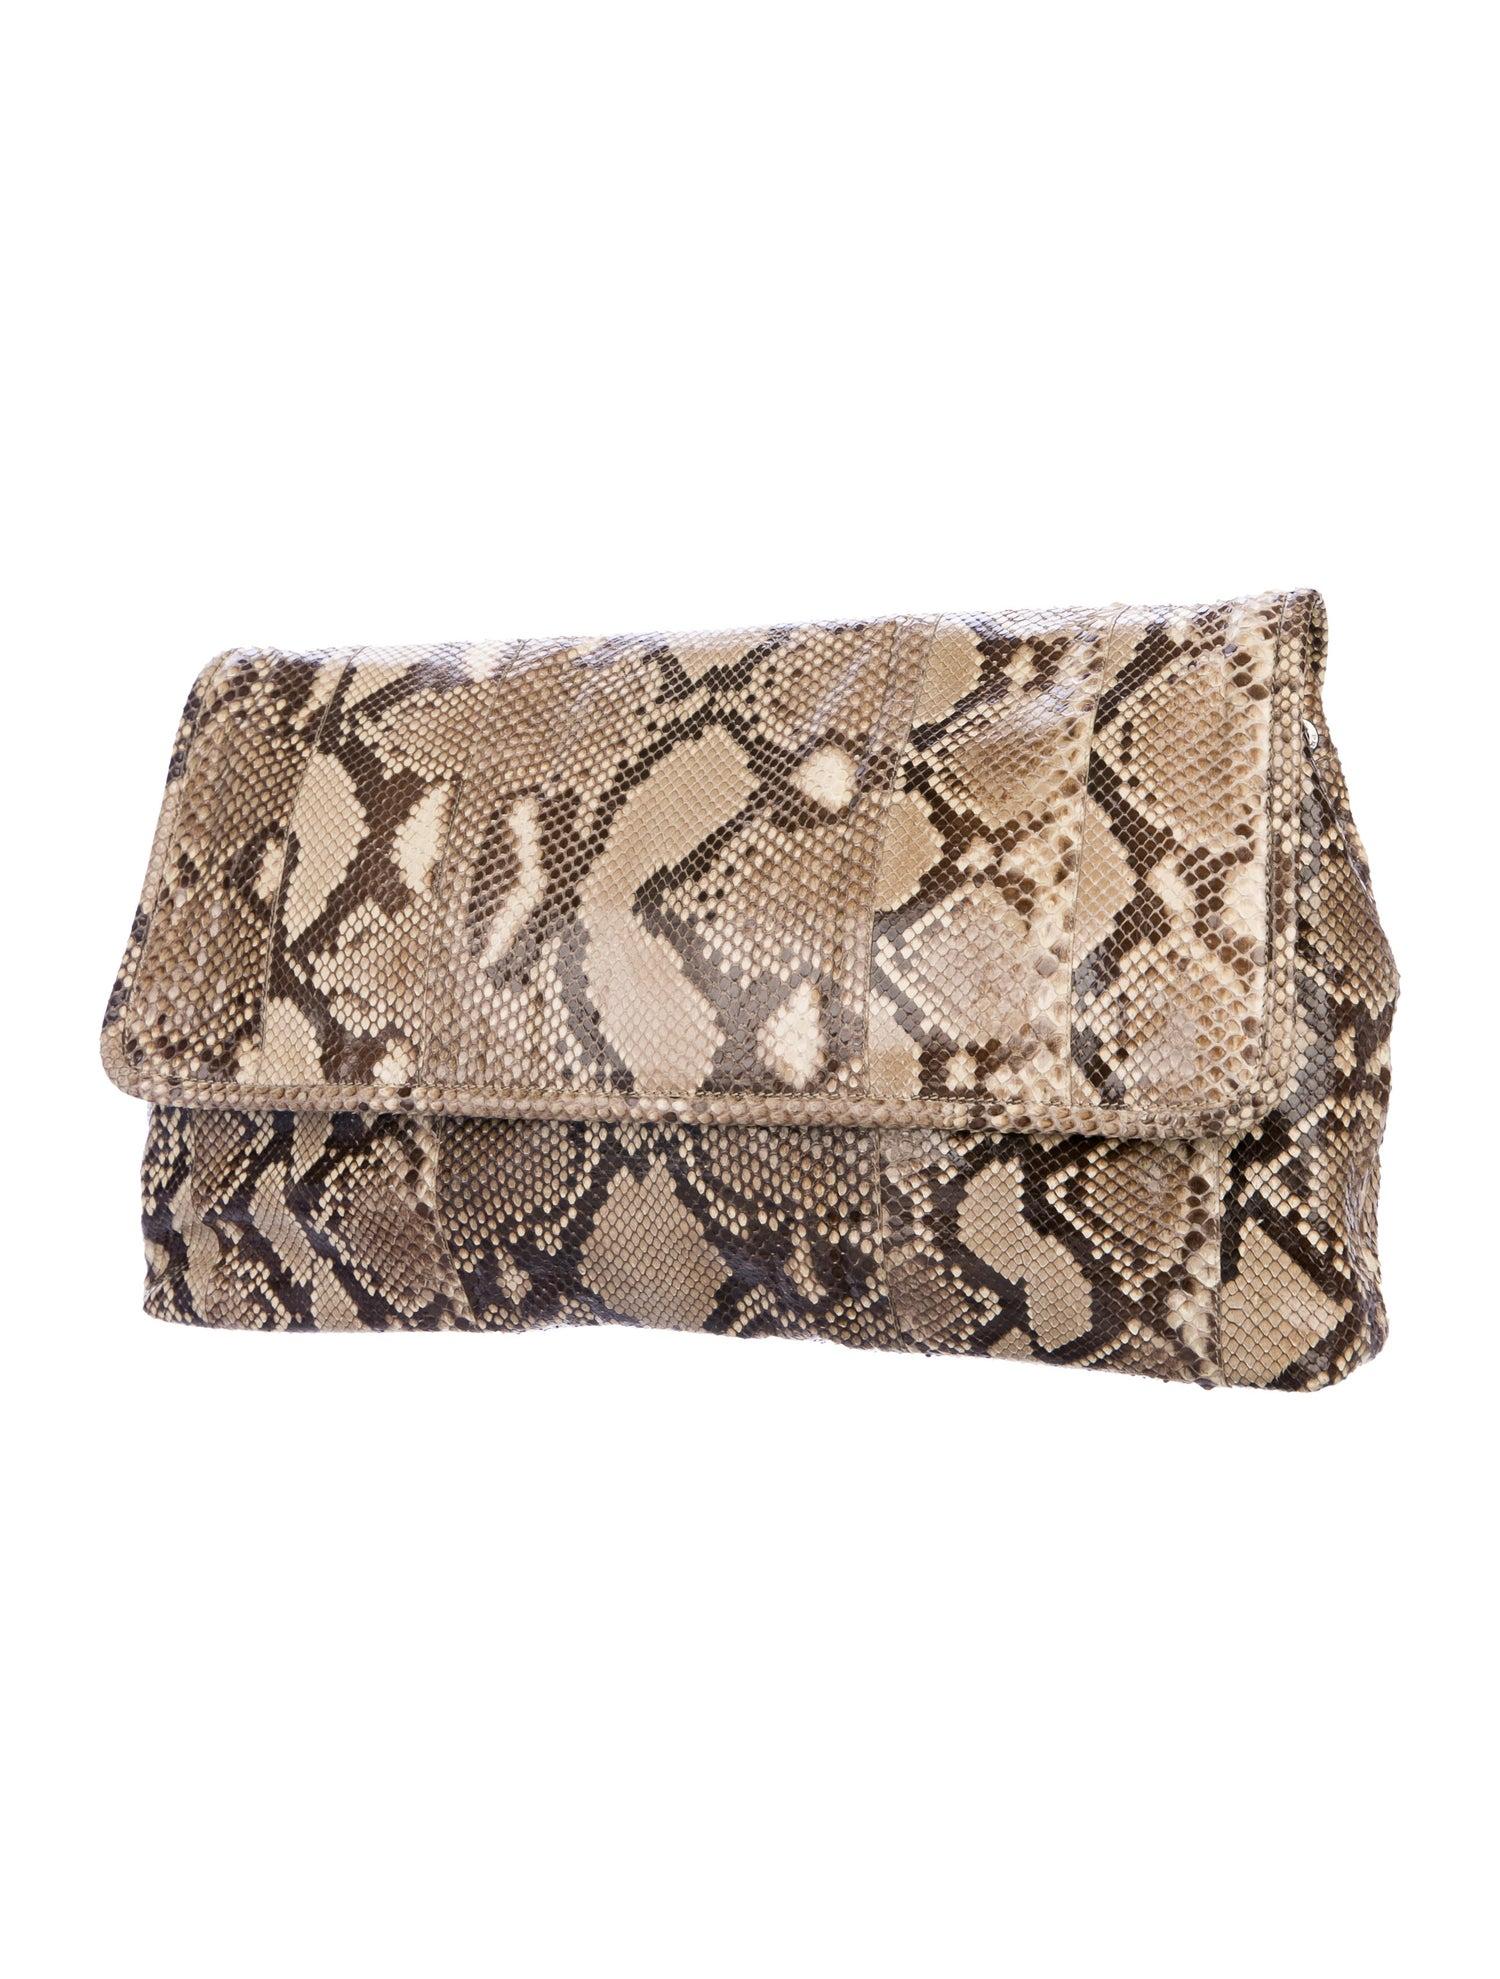 
Snakeskin
Silver tone hardware
Leather lining
Magnetic closure
Made in Italy
Measures 17